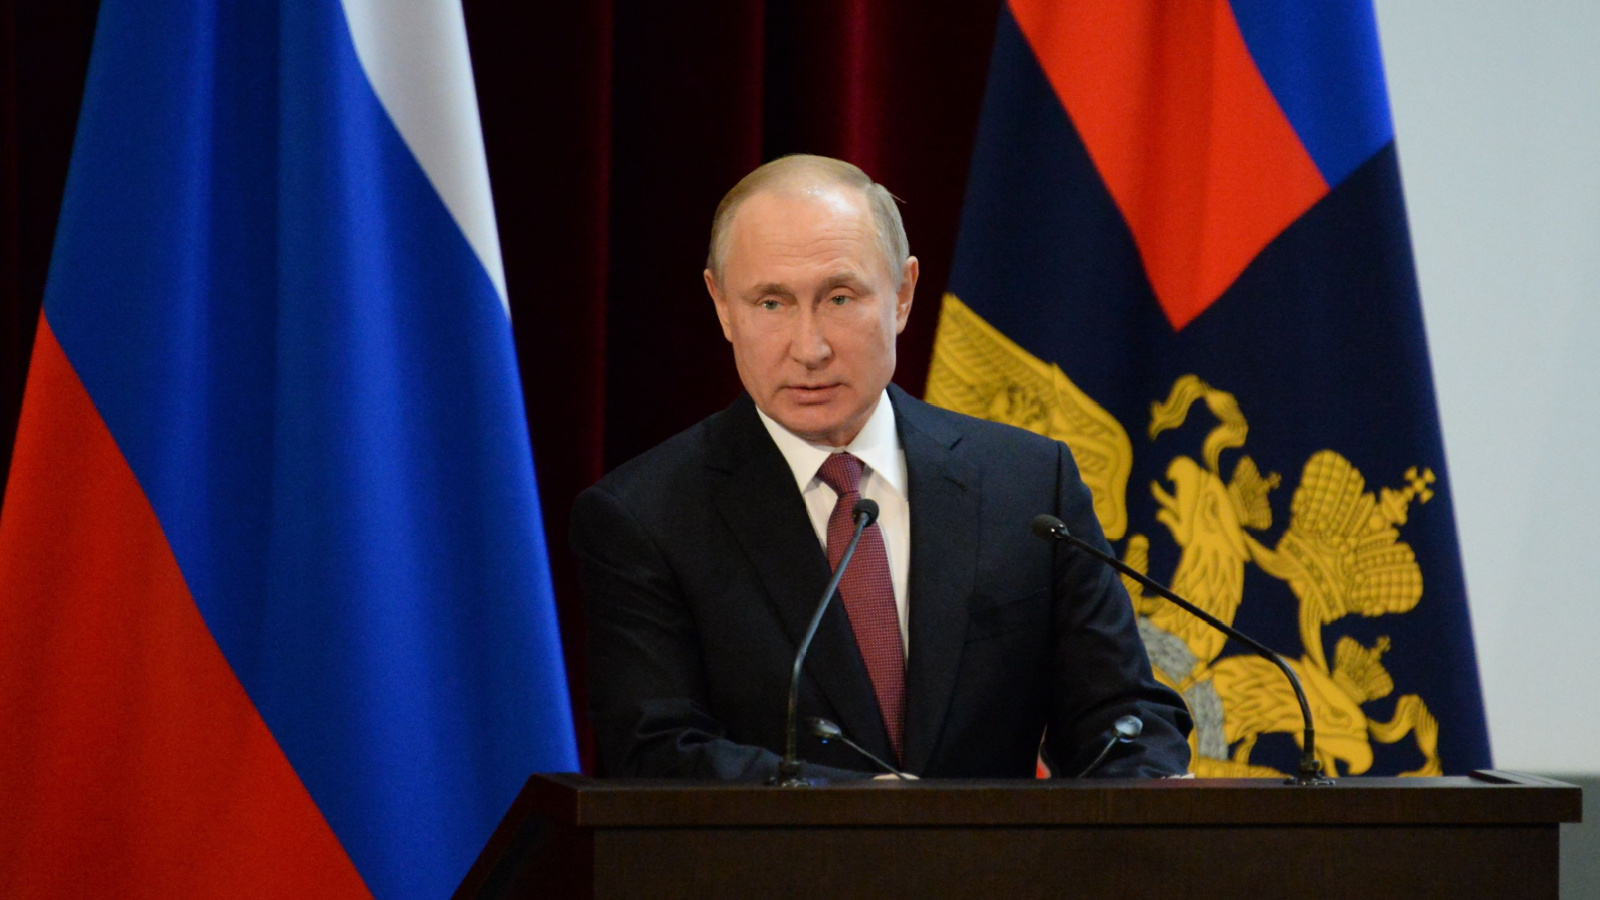 image credit: Free-Wind-2014/Shutterstock <p><span>In 2014, Russian President Vladimir Putin addressed the Duma regarding the annexation of Crimea. He spoke of historical ties and strategic interests, justifying the controversial move. Putin’s speech was a display of assertiveness and nationalistic sentiment. It remains a subject of international debate and analysis.</span></p>